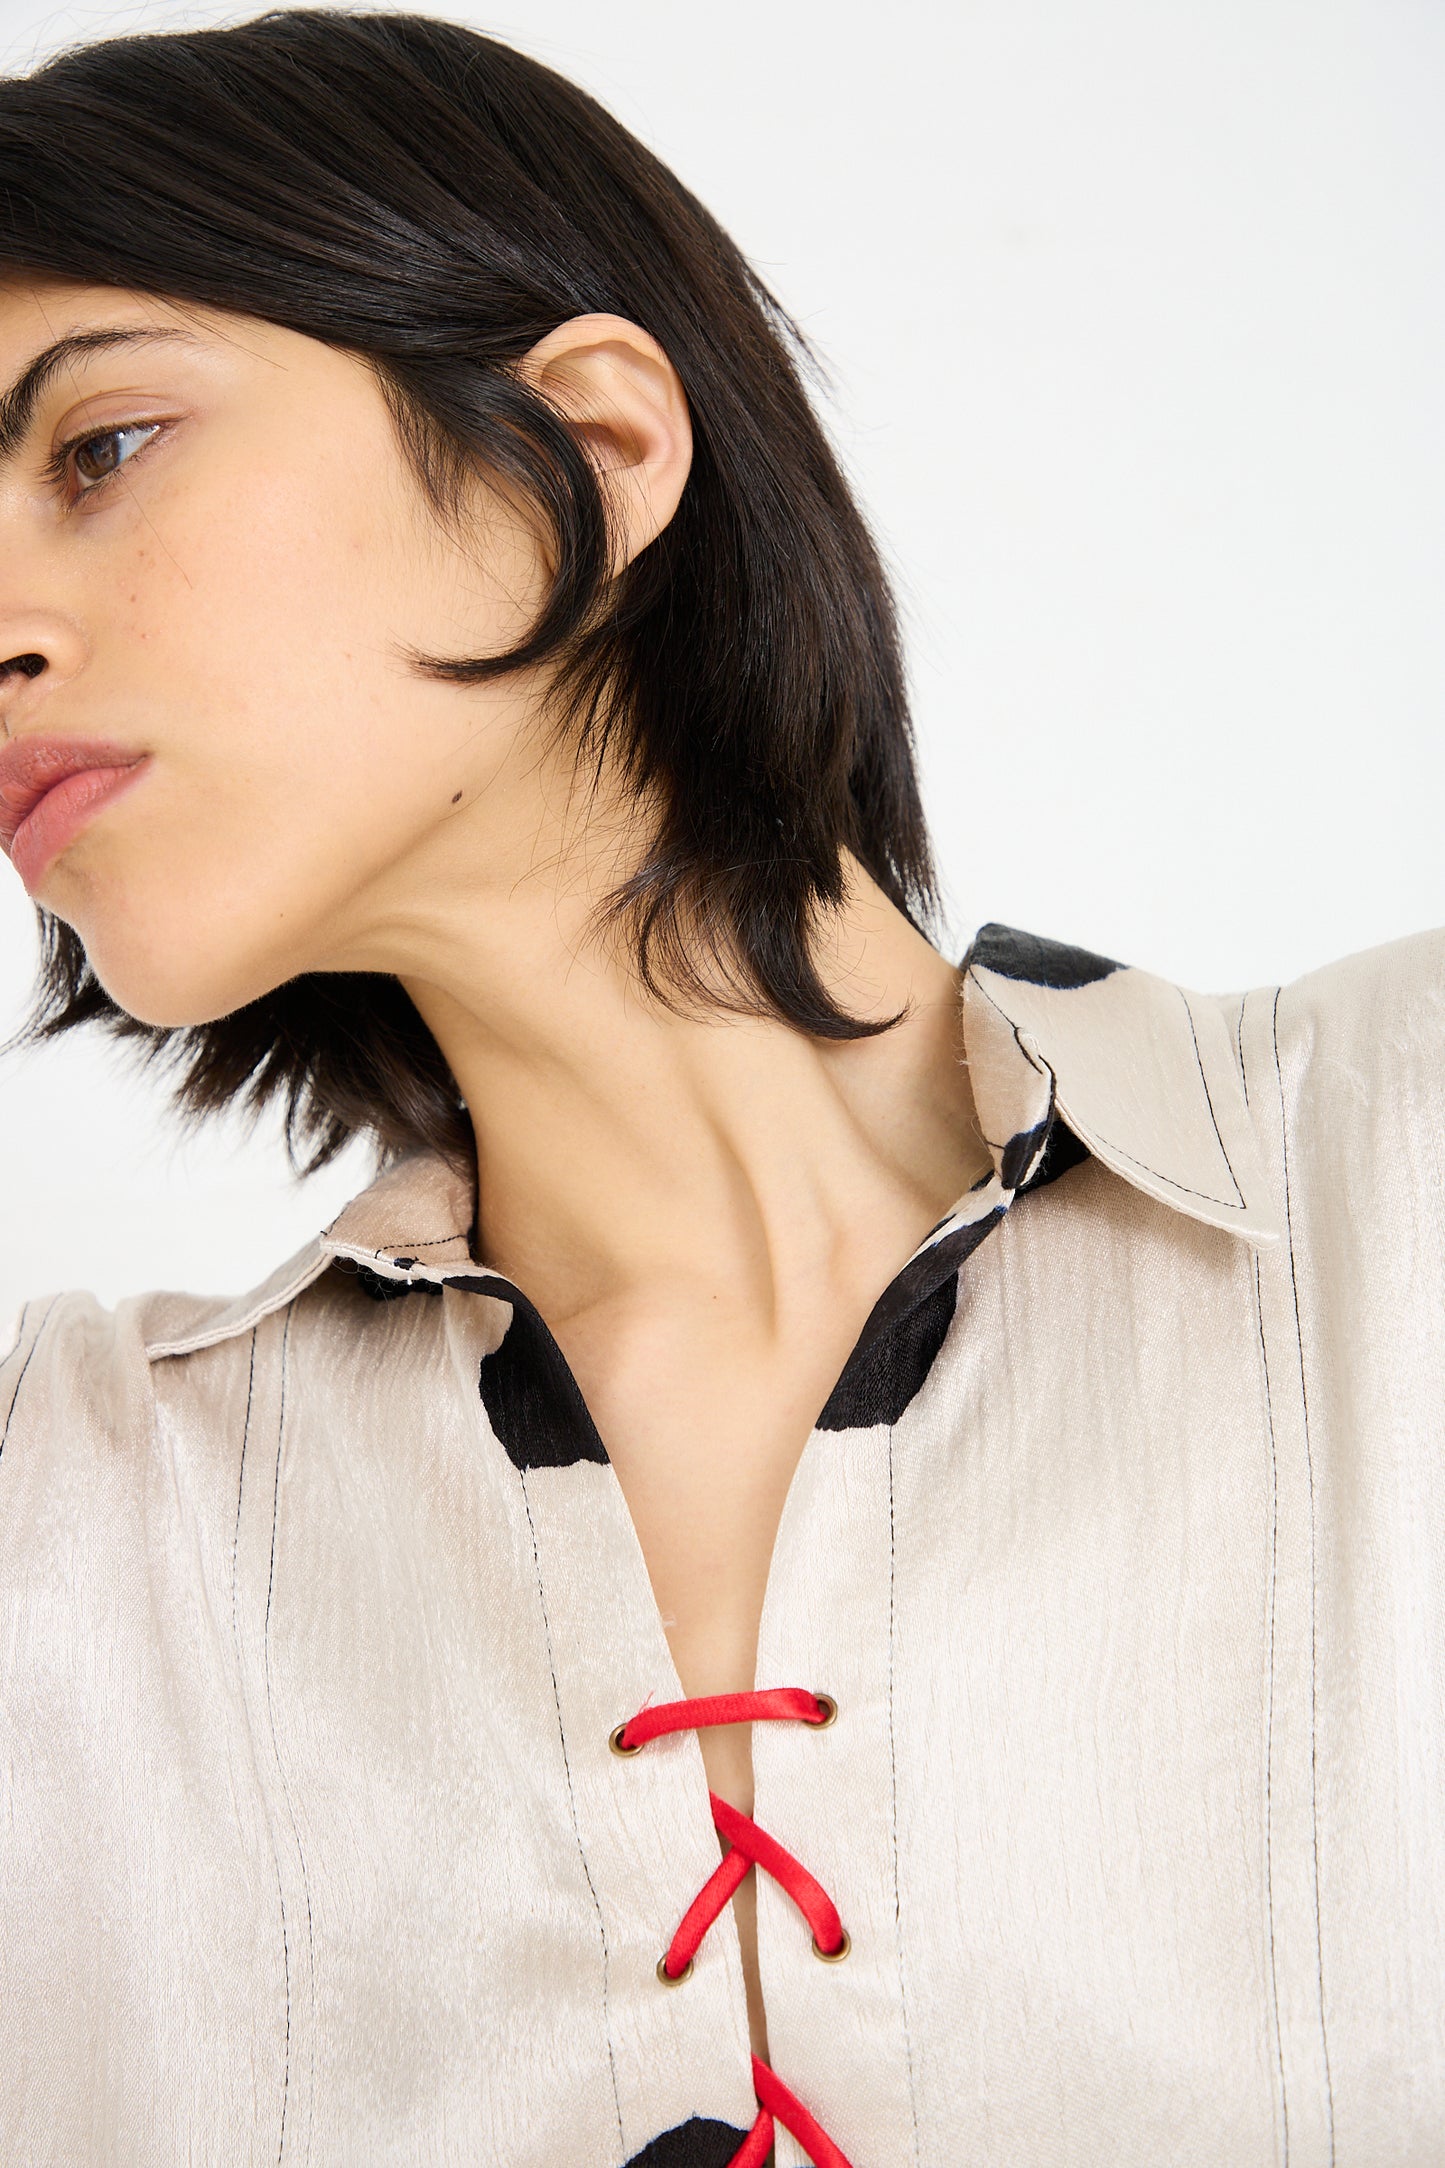 A person with short dark hair is shown in a close-up wearing a Silk Mashroo Lace Up Shirt in White by TIGRA TIGRA, which is a light-colored, long sleeve lace-up shirt with red detailing and black accents. The person's head is slightly turned to the side.